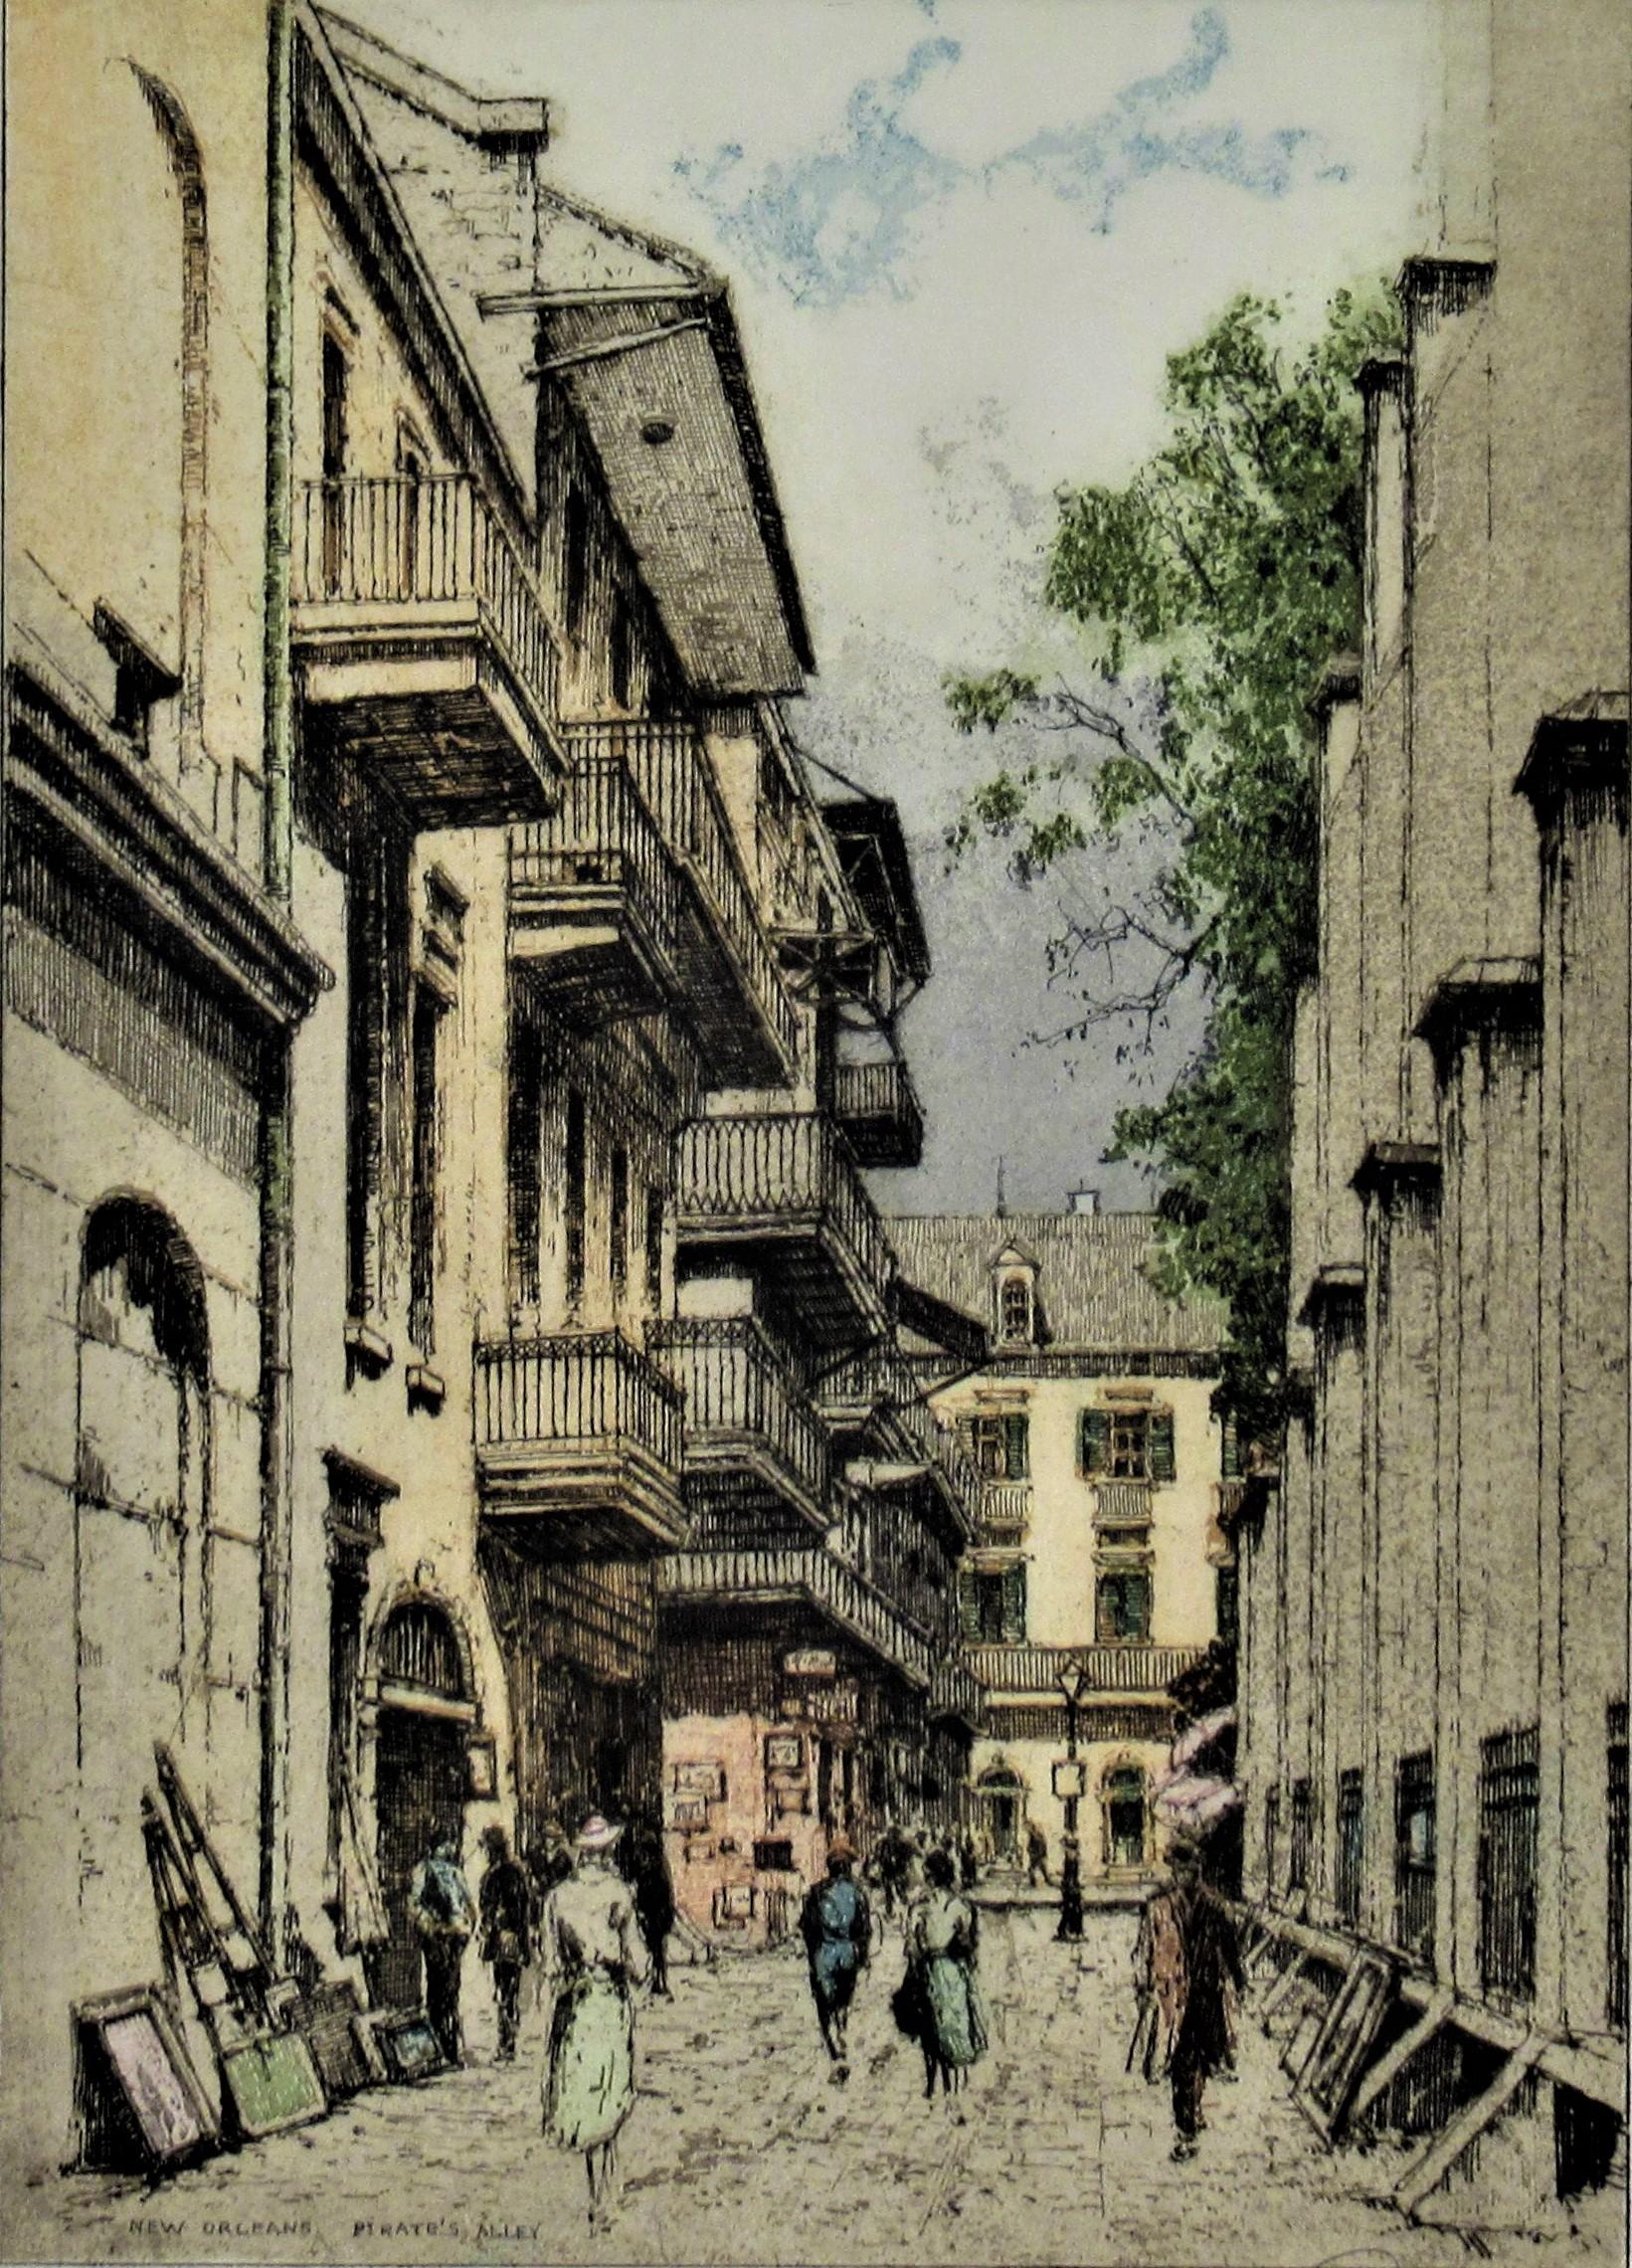 New Orleans, Pirate's Alley - Print by Josef Eidenberger